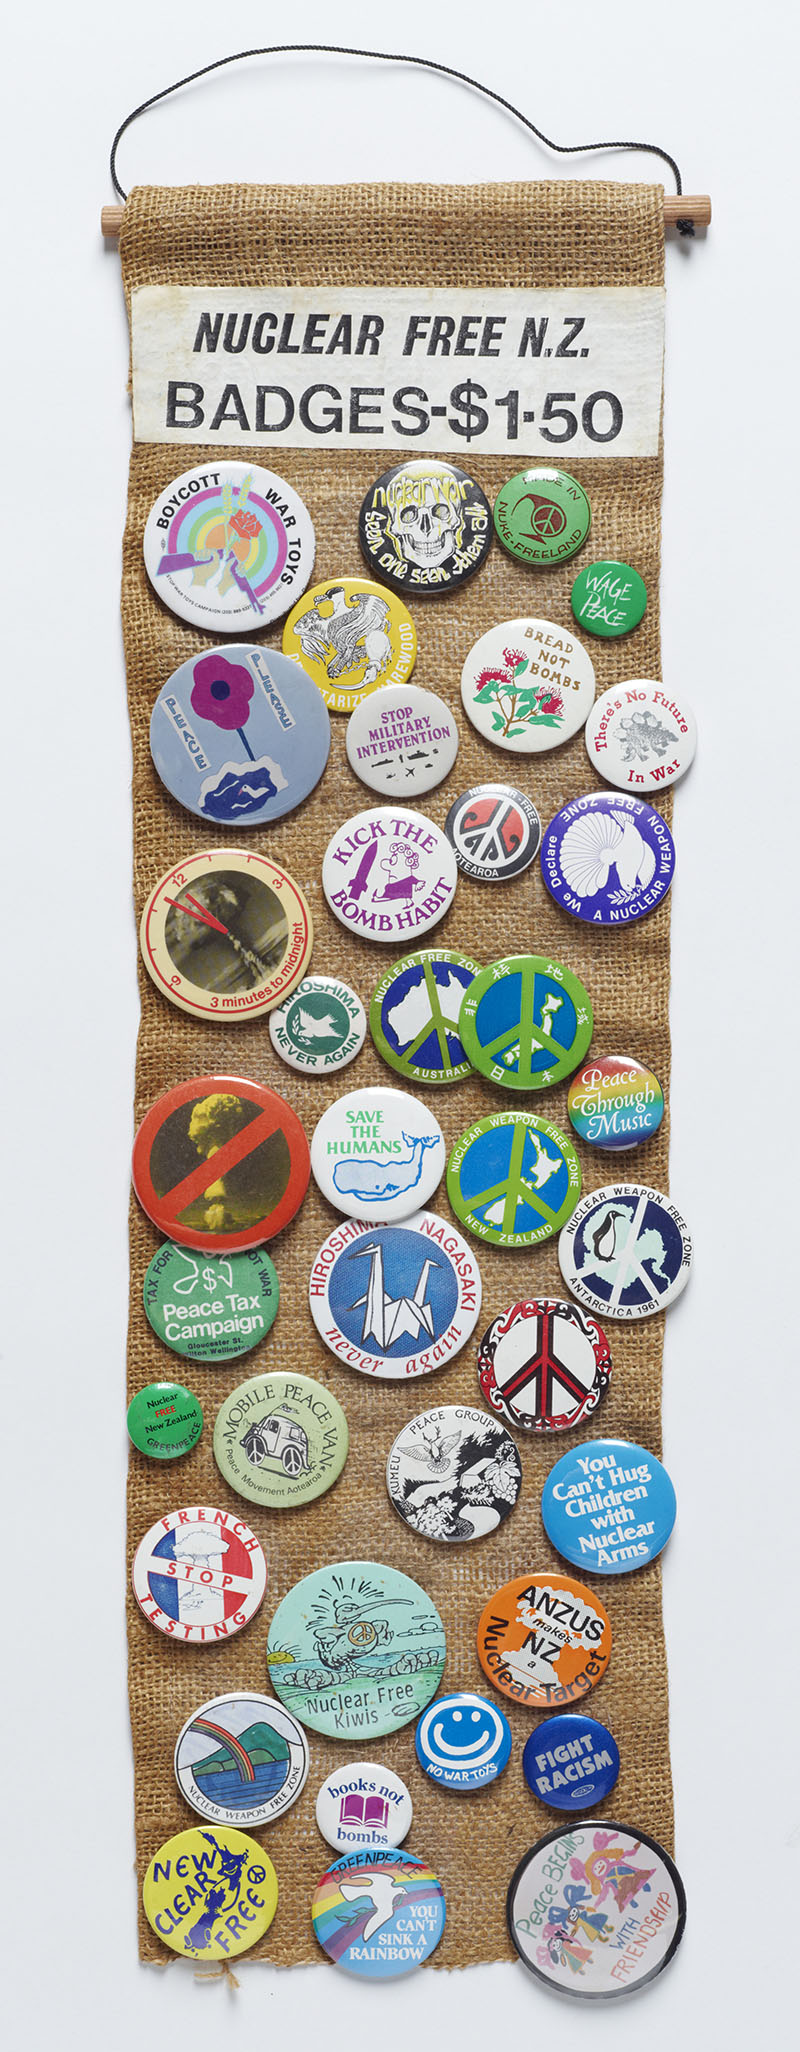 A piece of hessian cloth with a hanger and a sign saying "Nuclear free N.Z. badges – $1.50" on it. Attached to the hessian are dozens of vibrant anti-nuclear badges